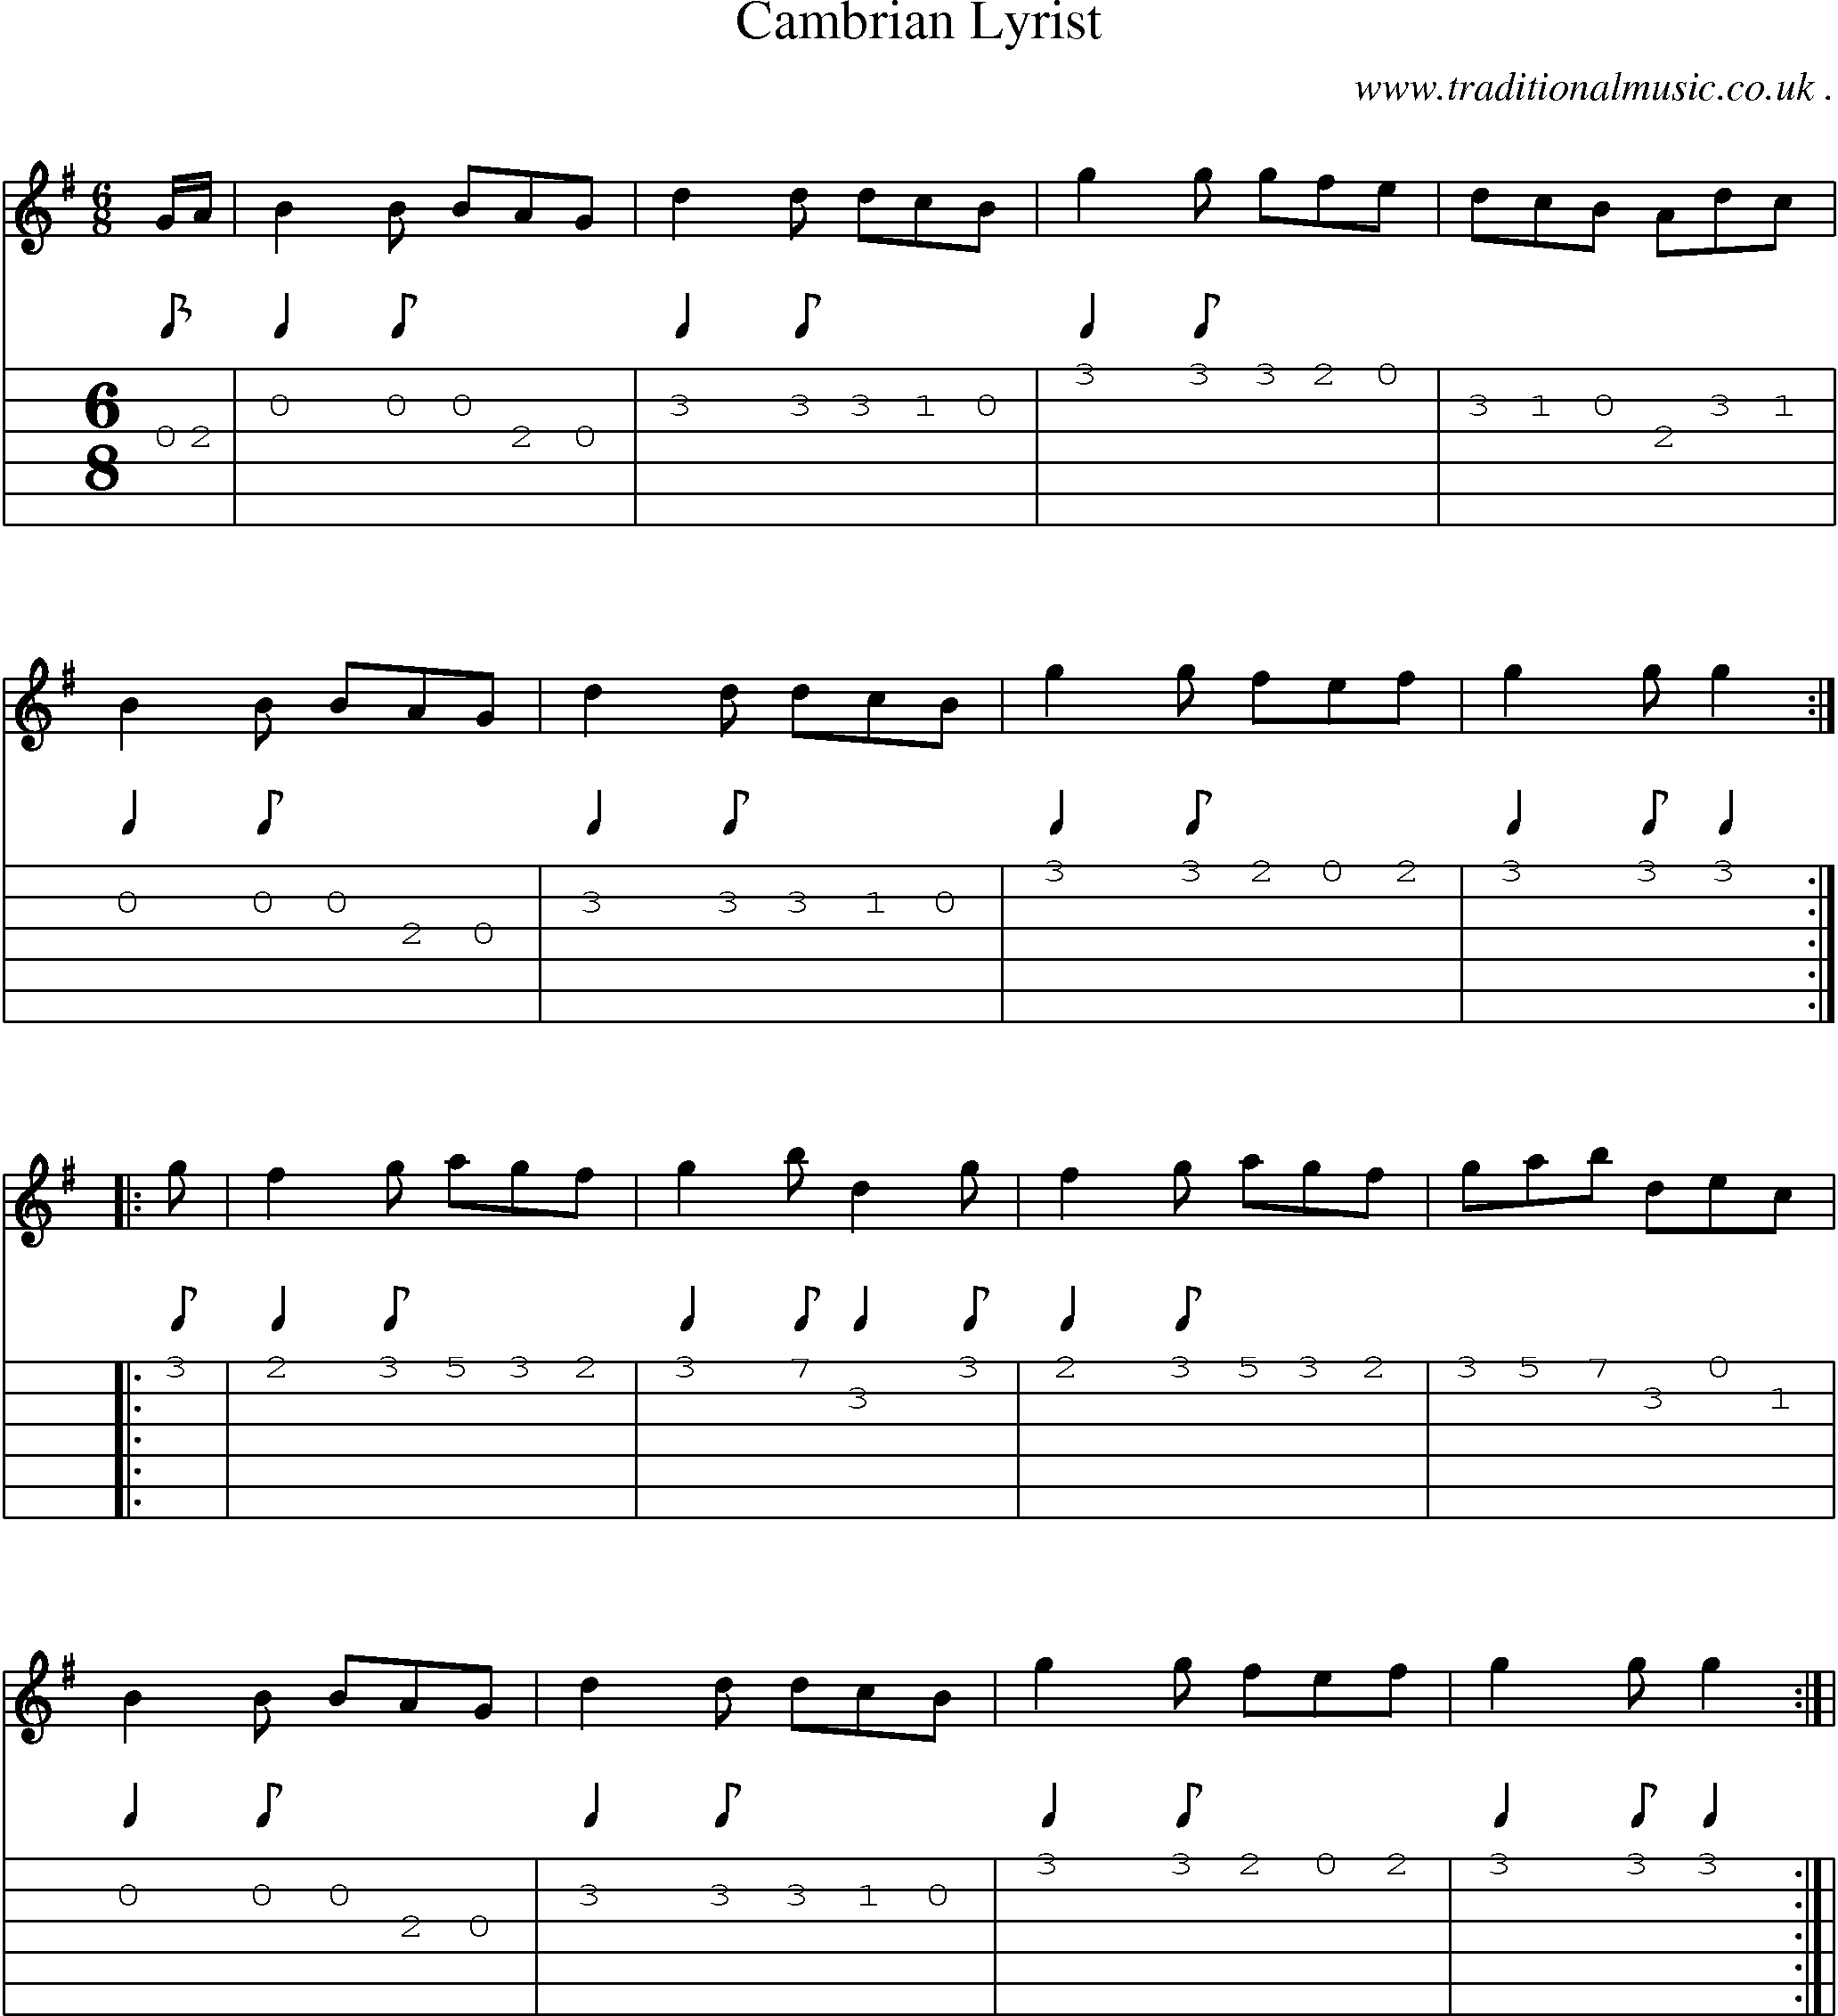 Sheet-Music and Guitar Tabs for Cambrian Lyrist